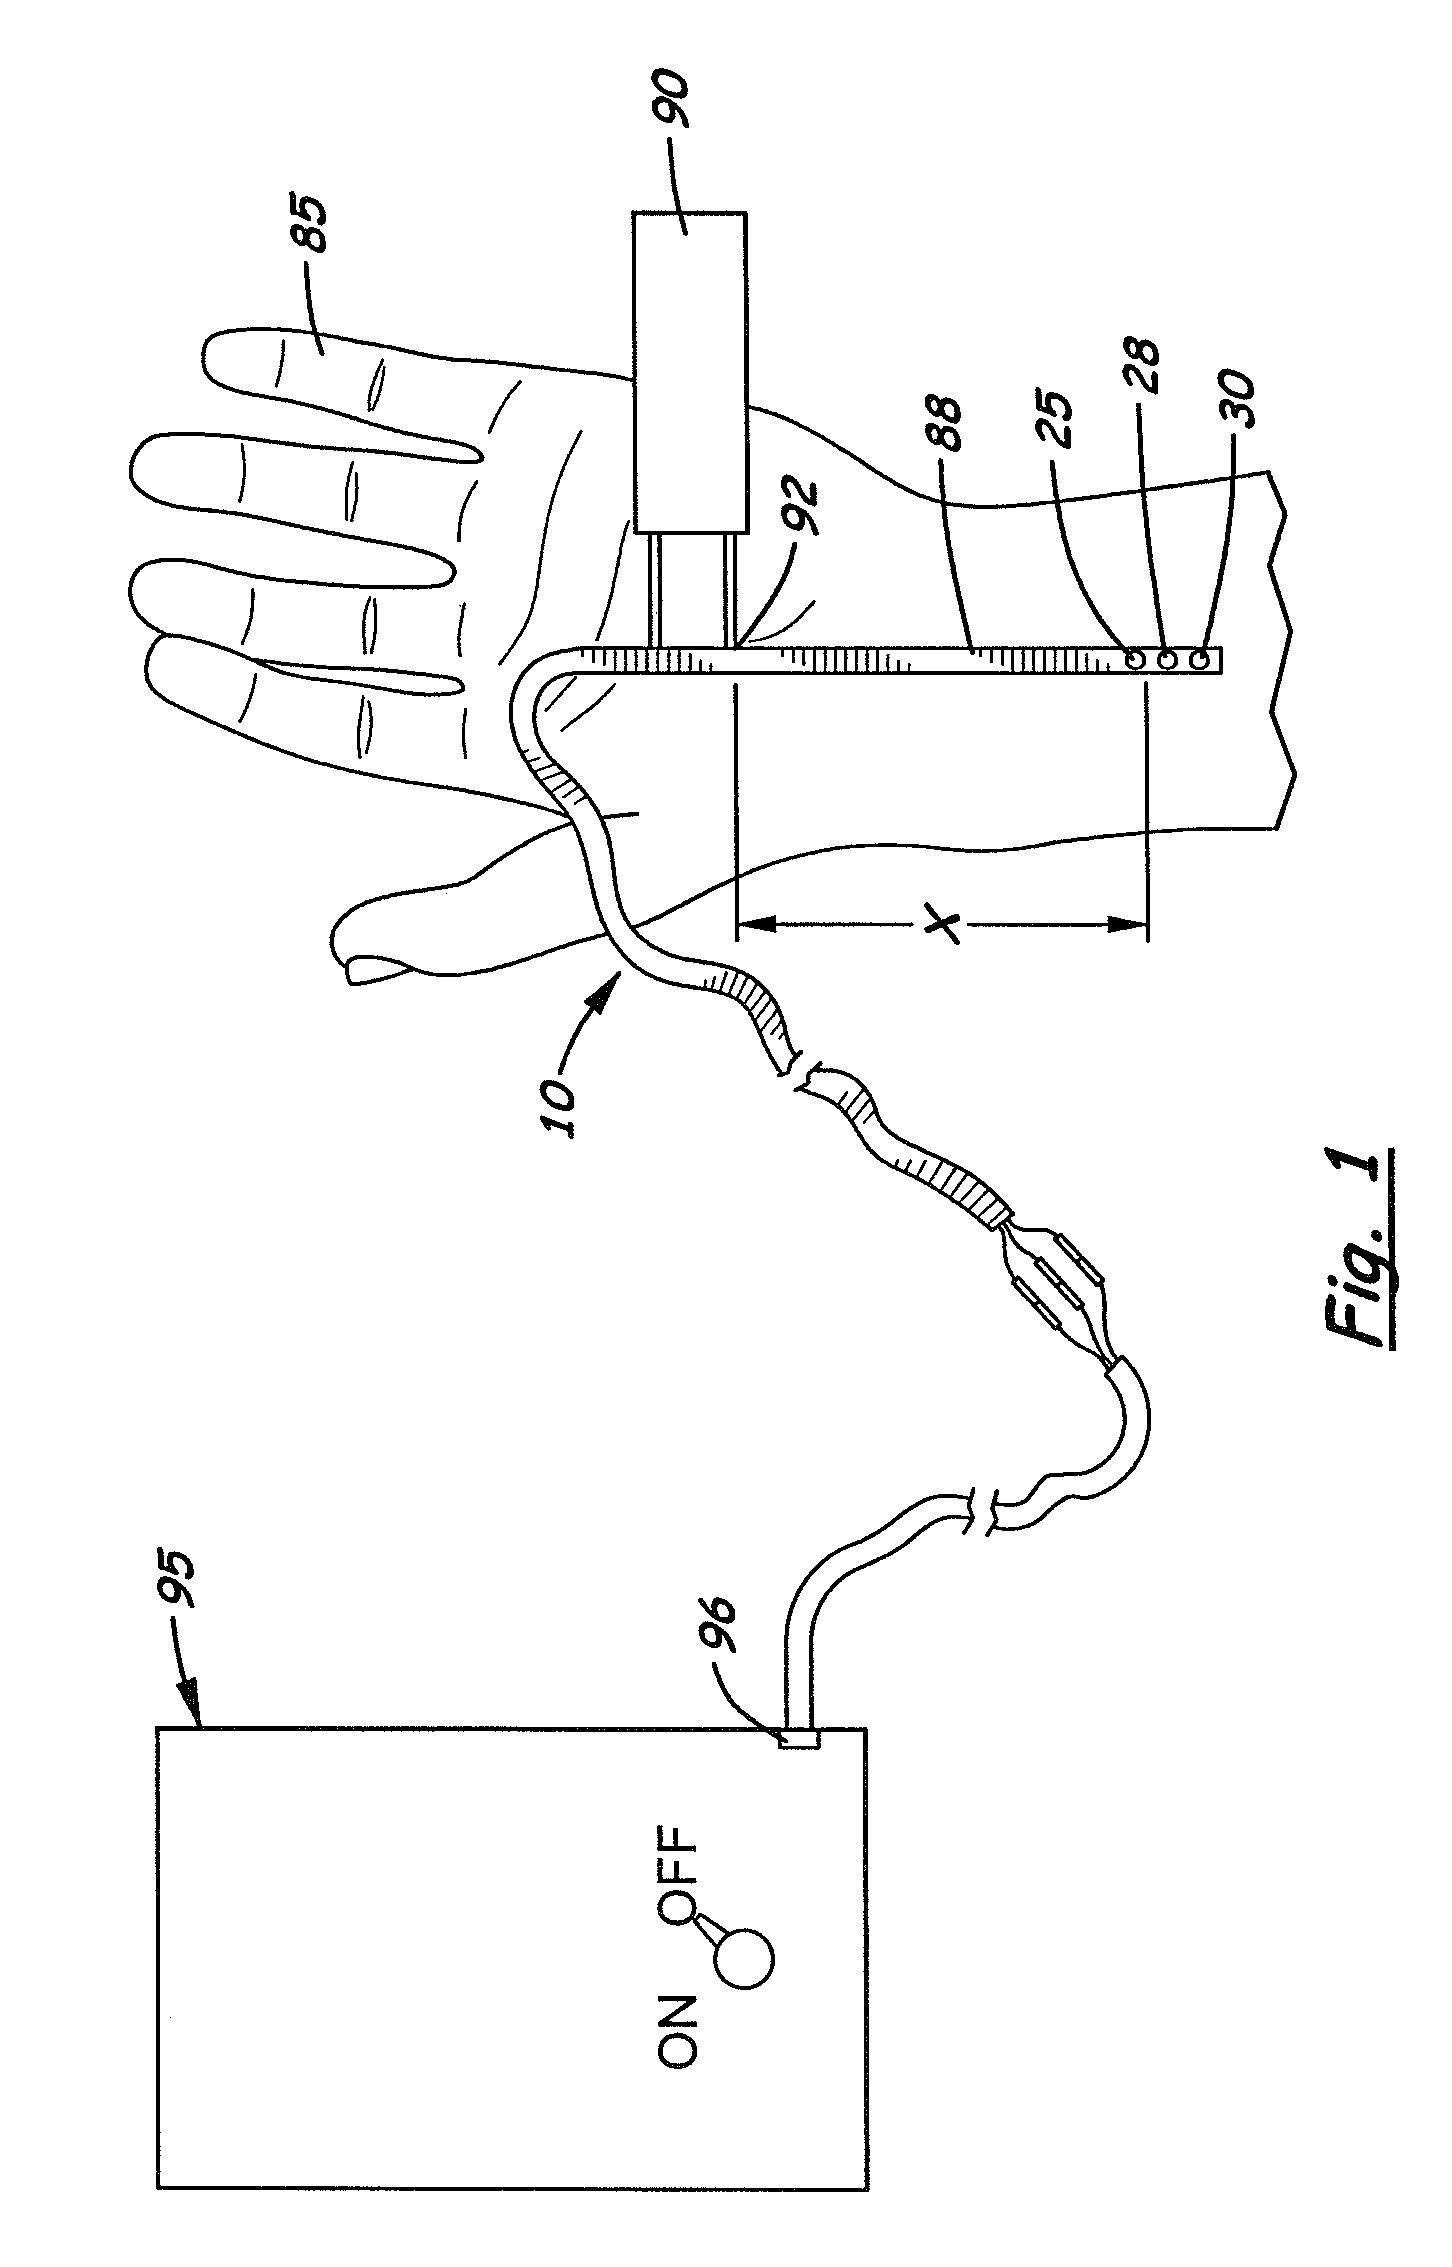 Electric diagnostic tape measure and method